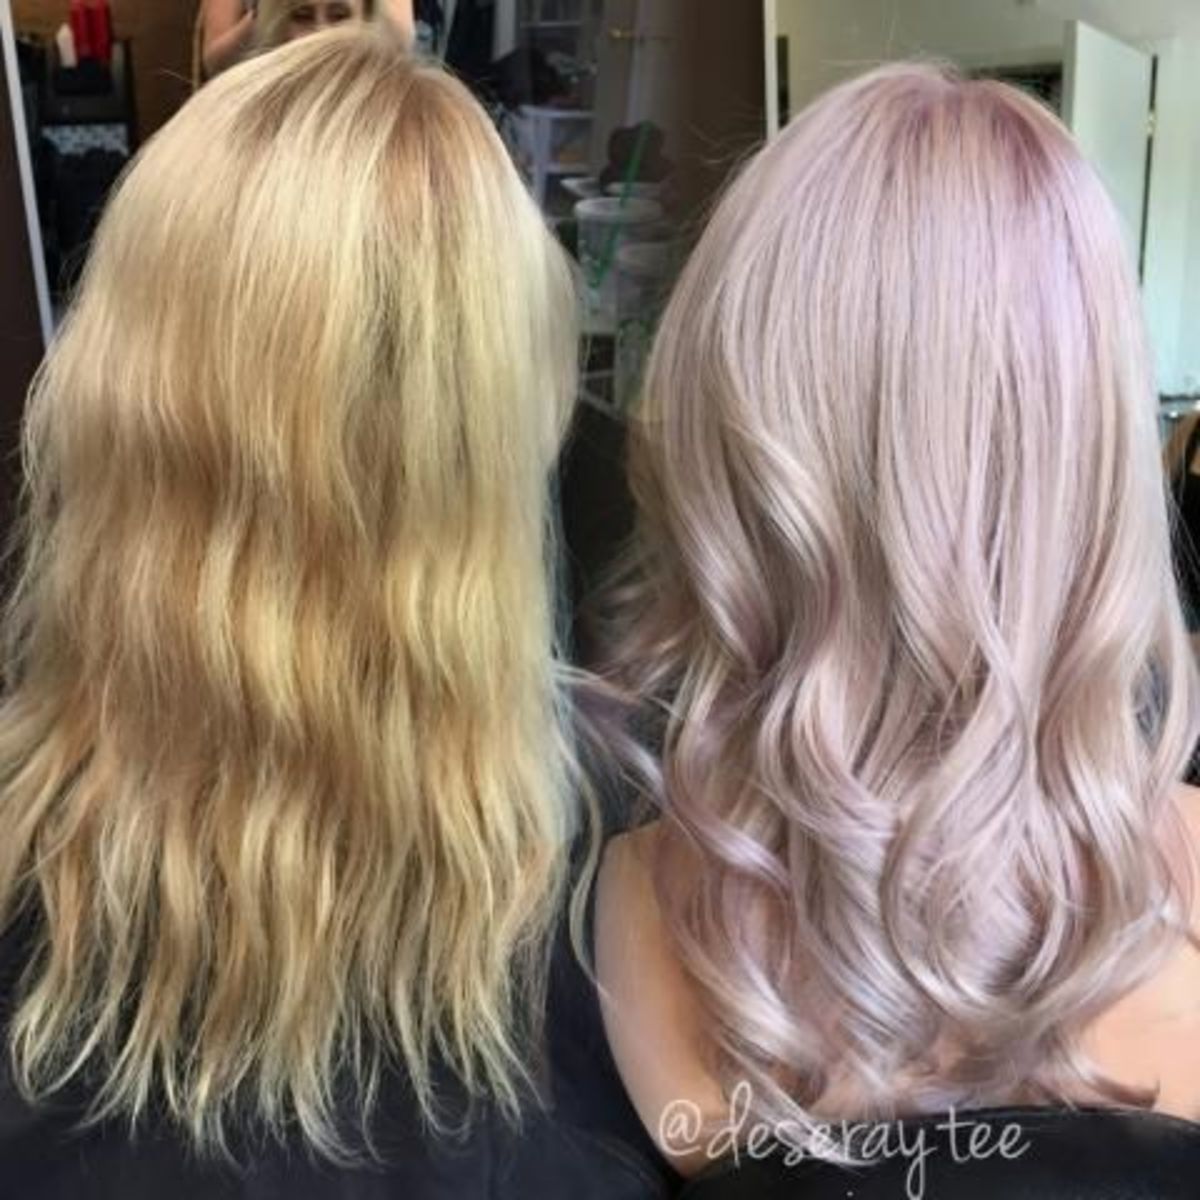 15 best Blonde Highlights for Gray Hair Ideas images on 